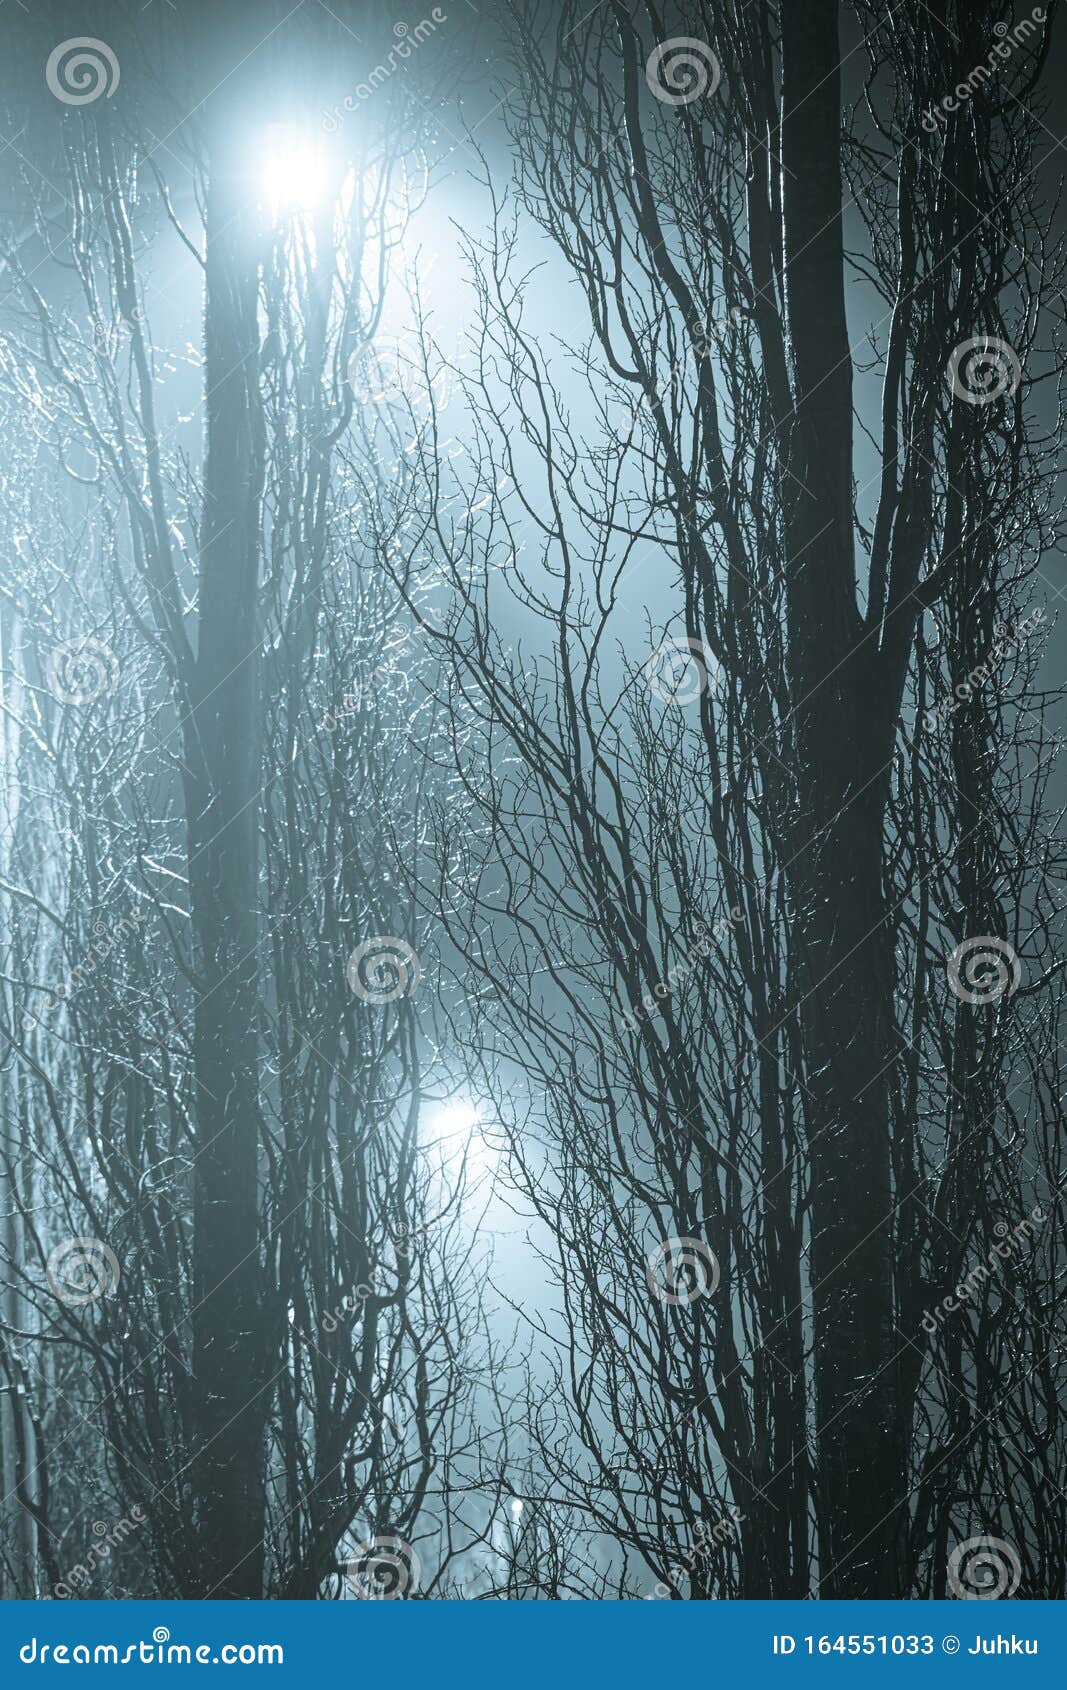 Tree Branches at Foggy Night Lit by Streetlamp Stock Image - Image of